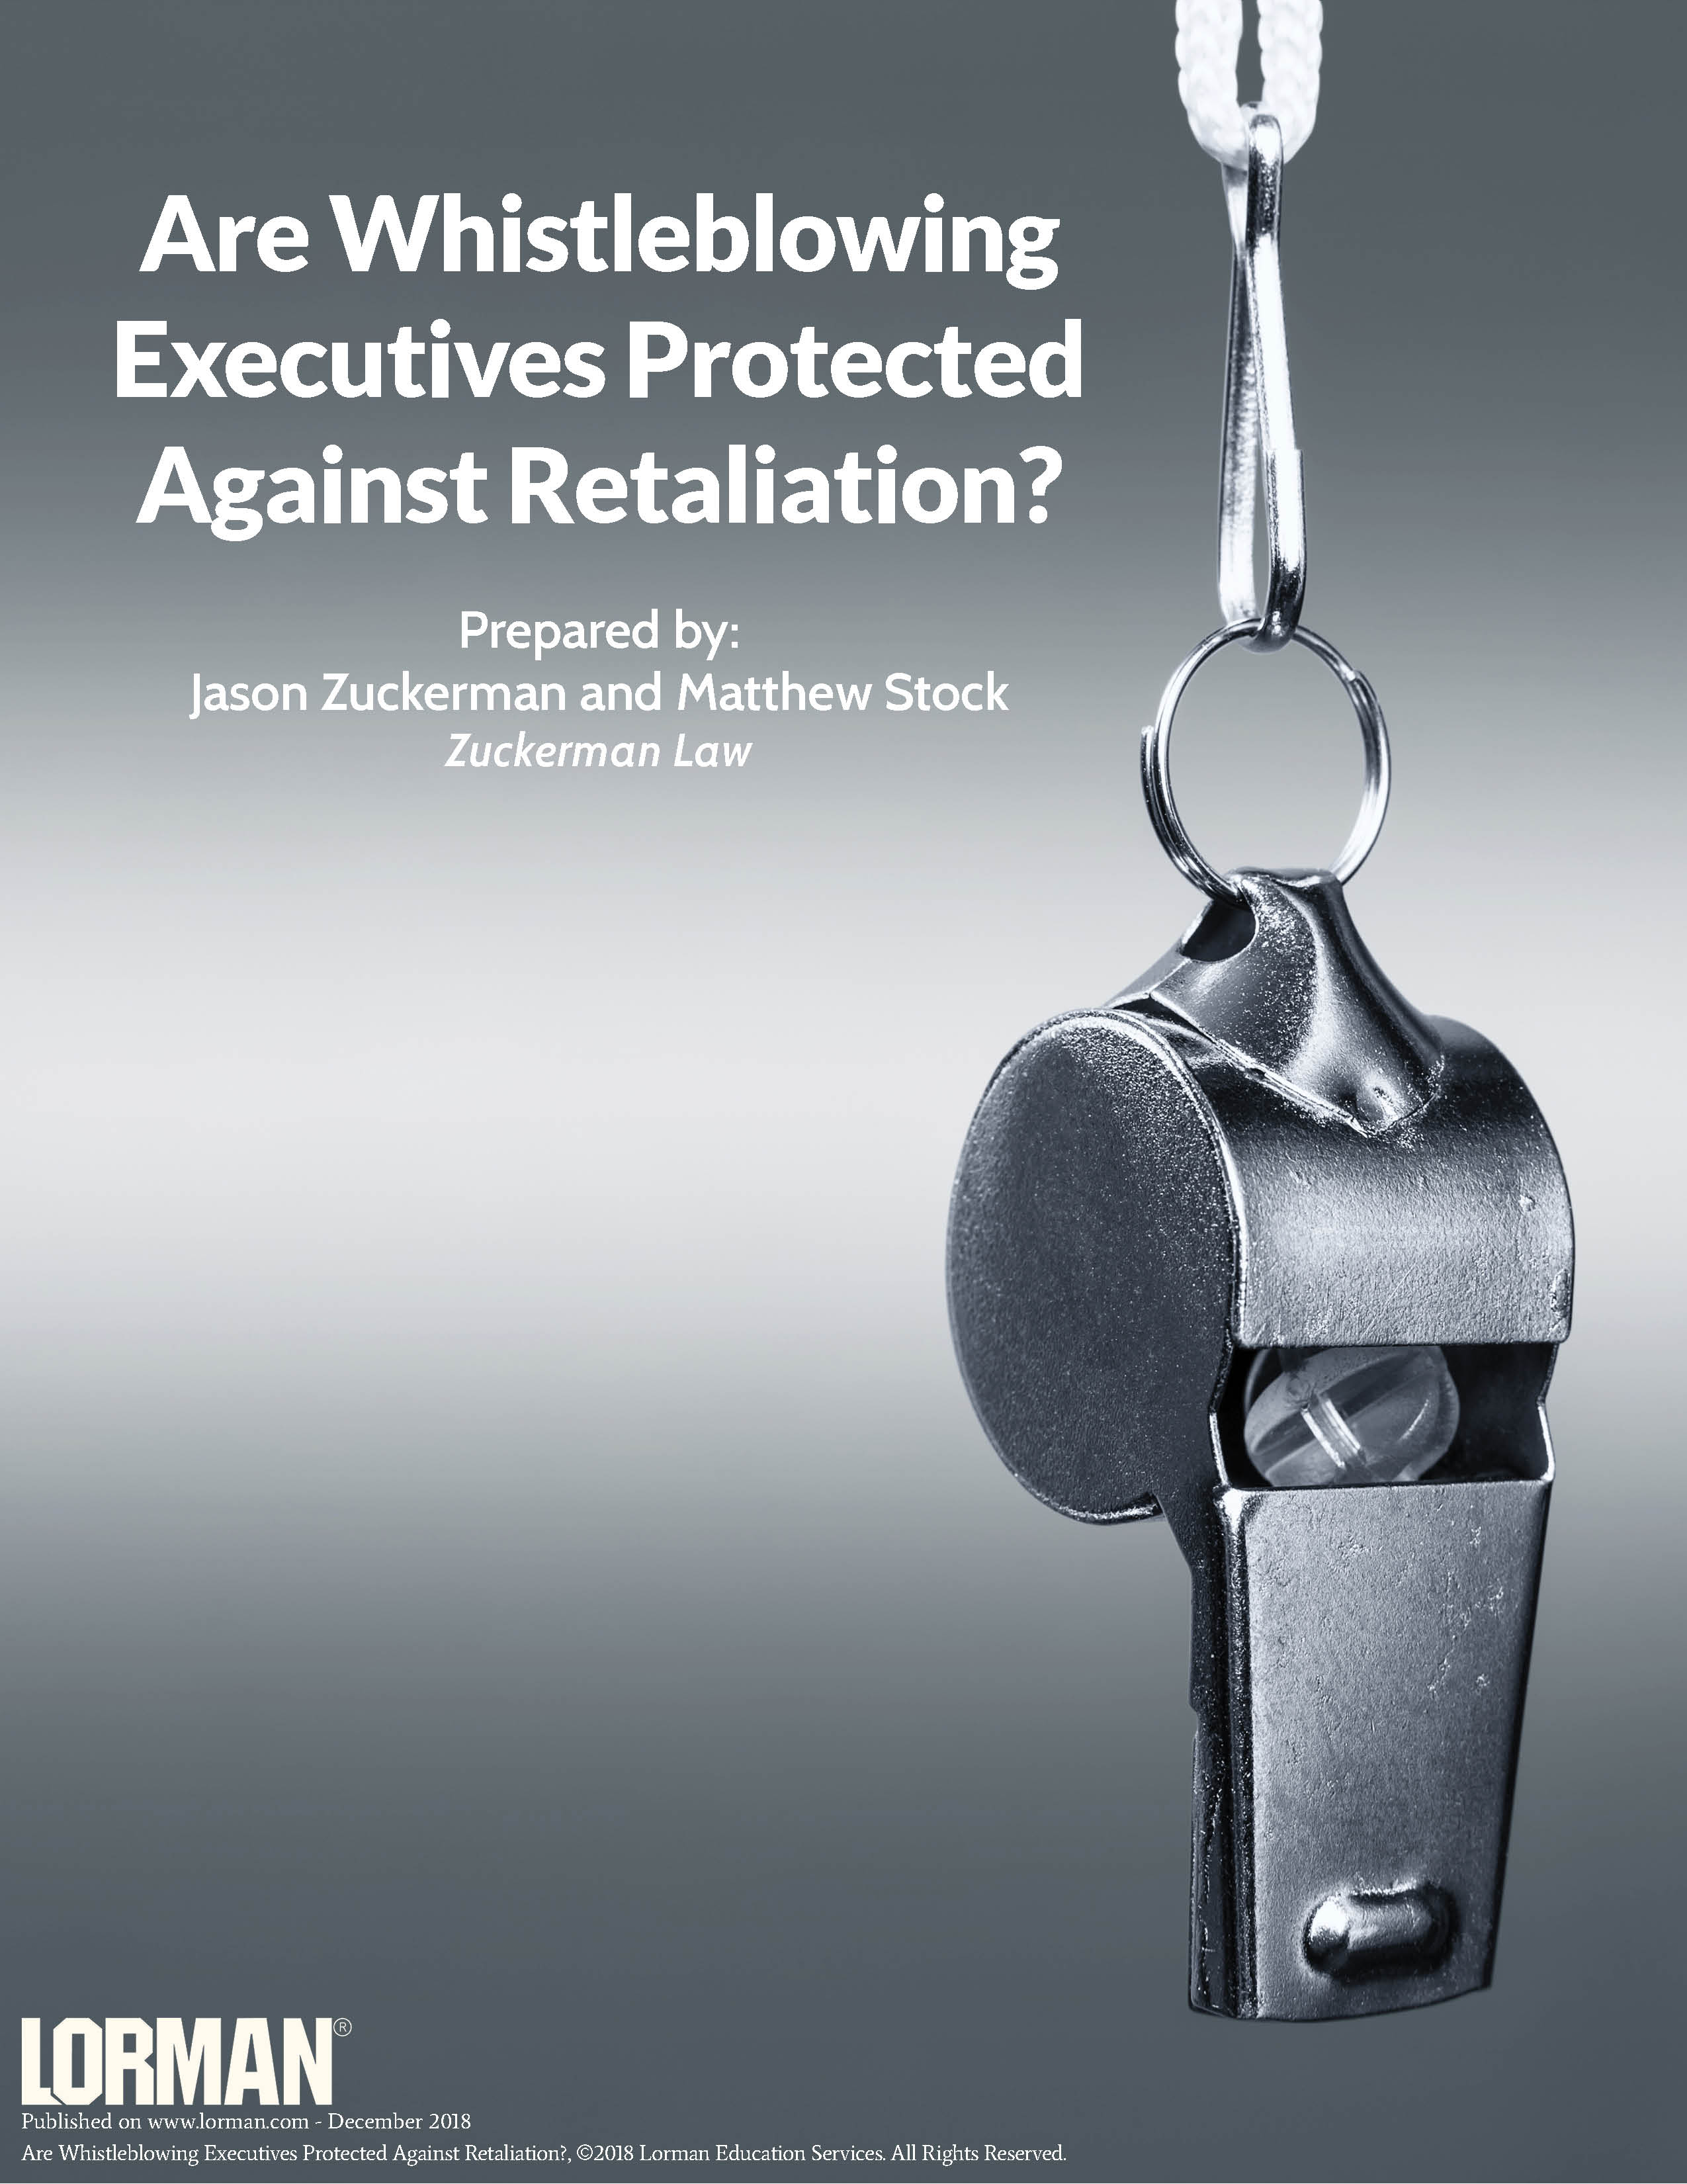 Are Whistleblowing Executives Protected Against Retaliation?